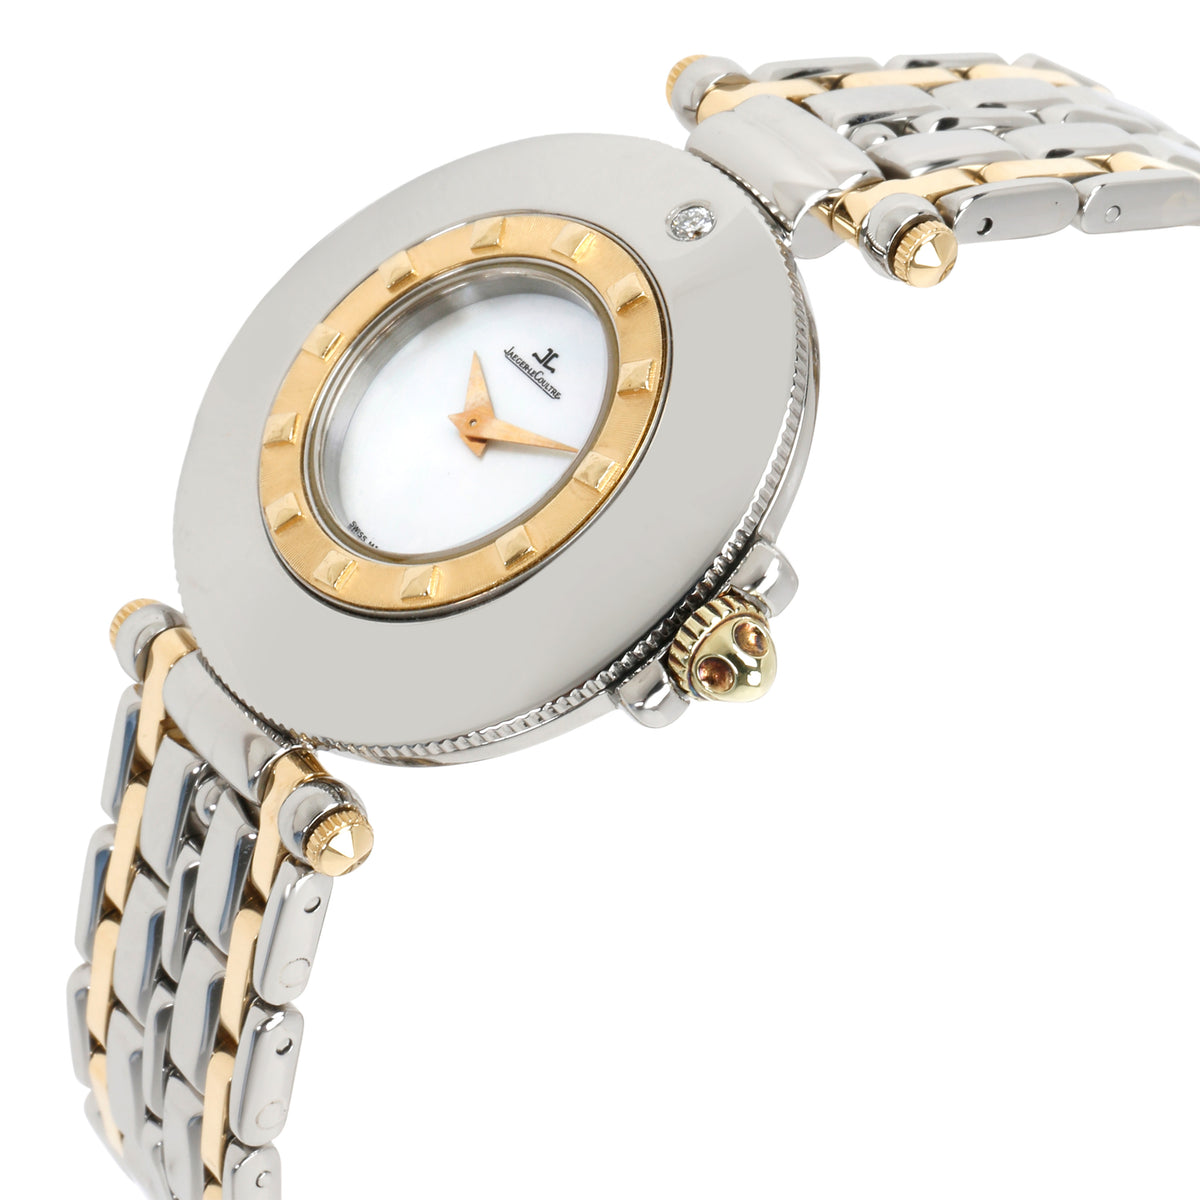 Jaeger-LeCoultre Rendezvous 421.5.09 Women's Watch in 18kt Stainless Steel/Yello